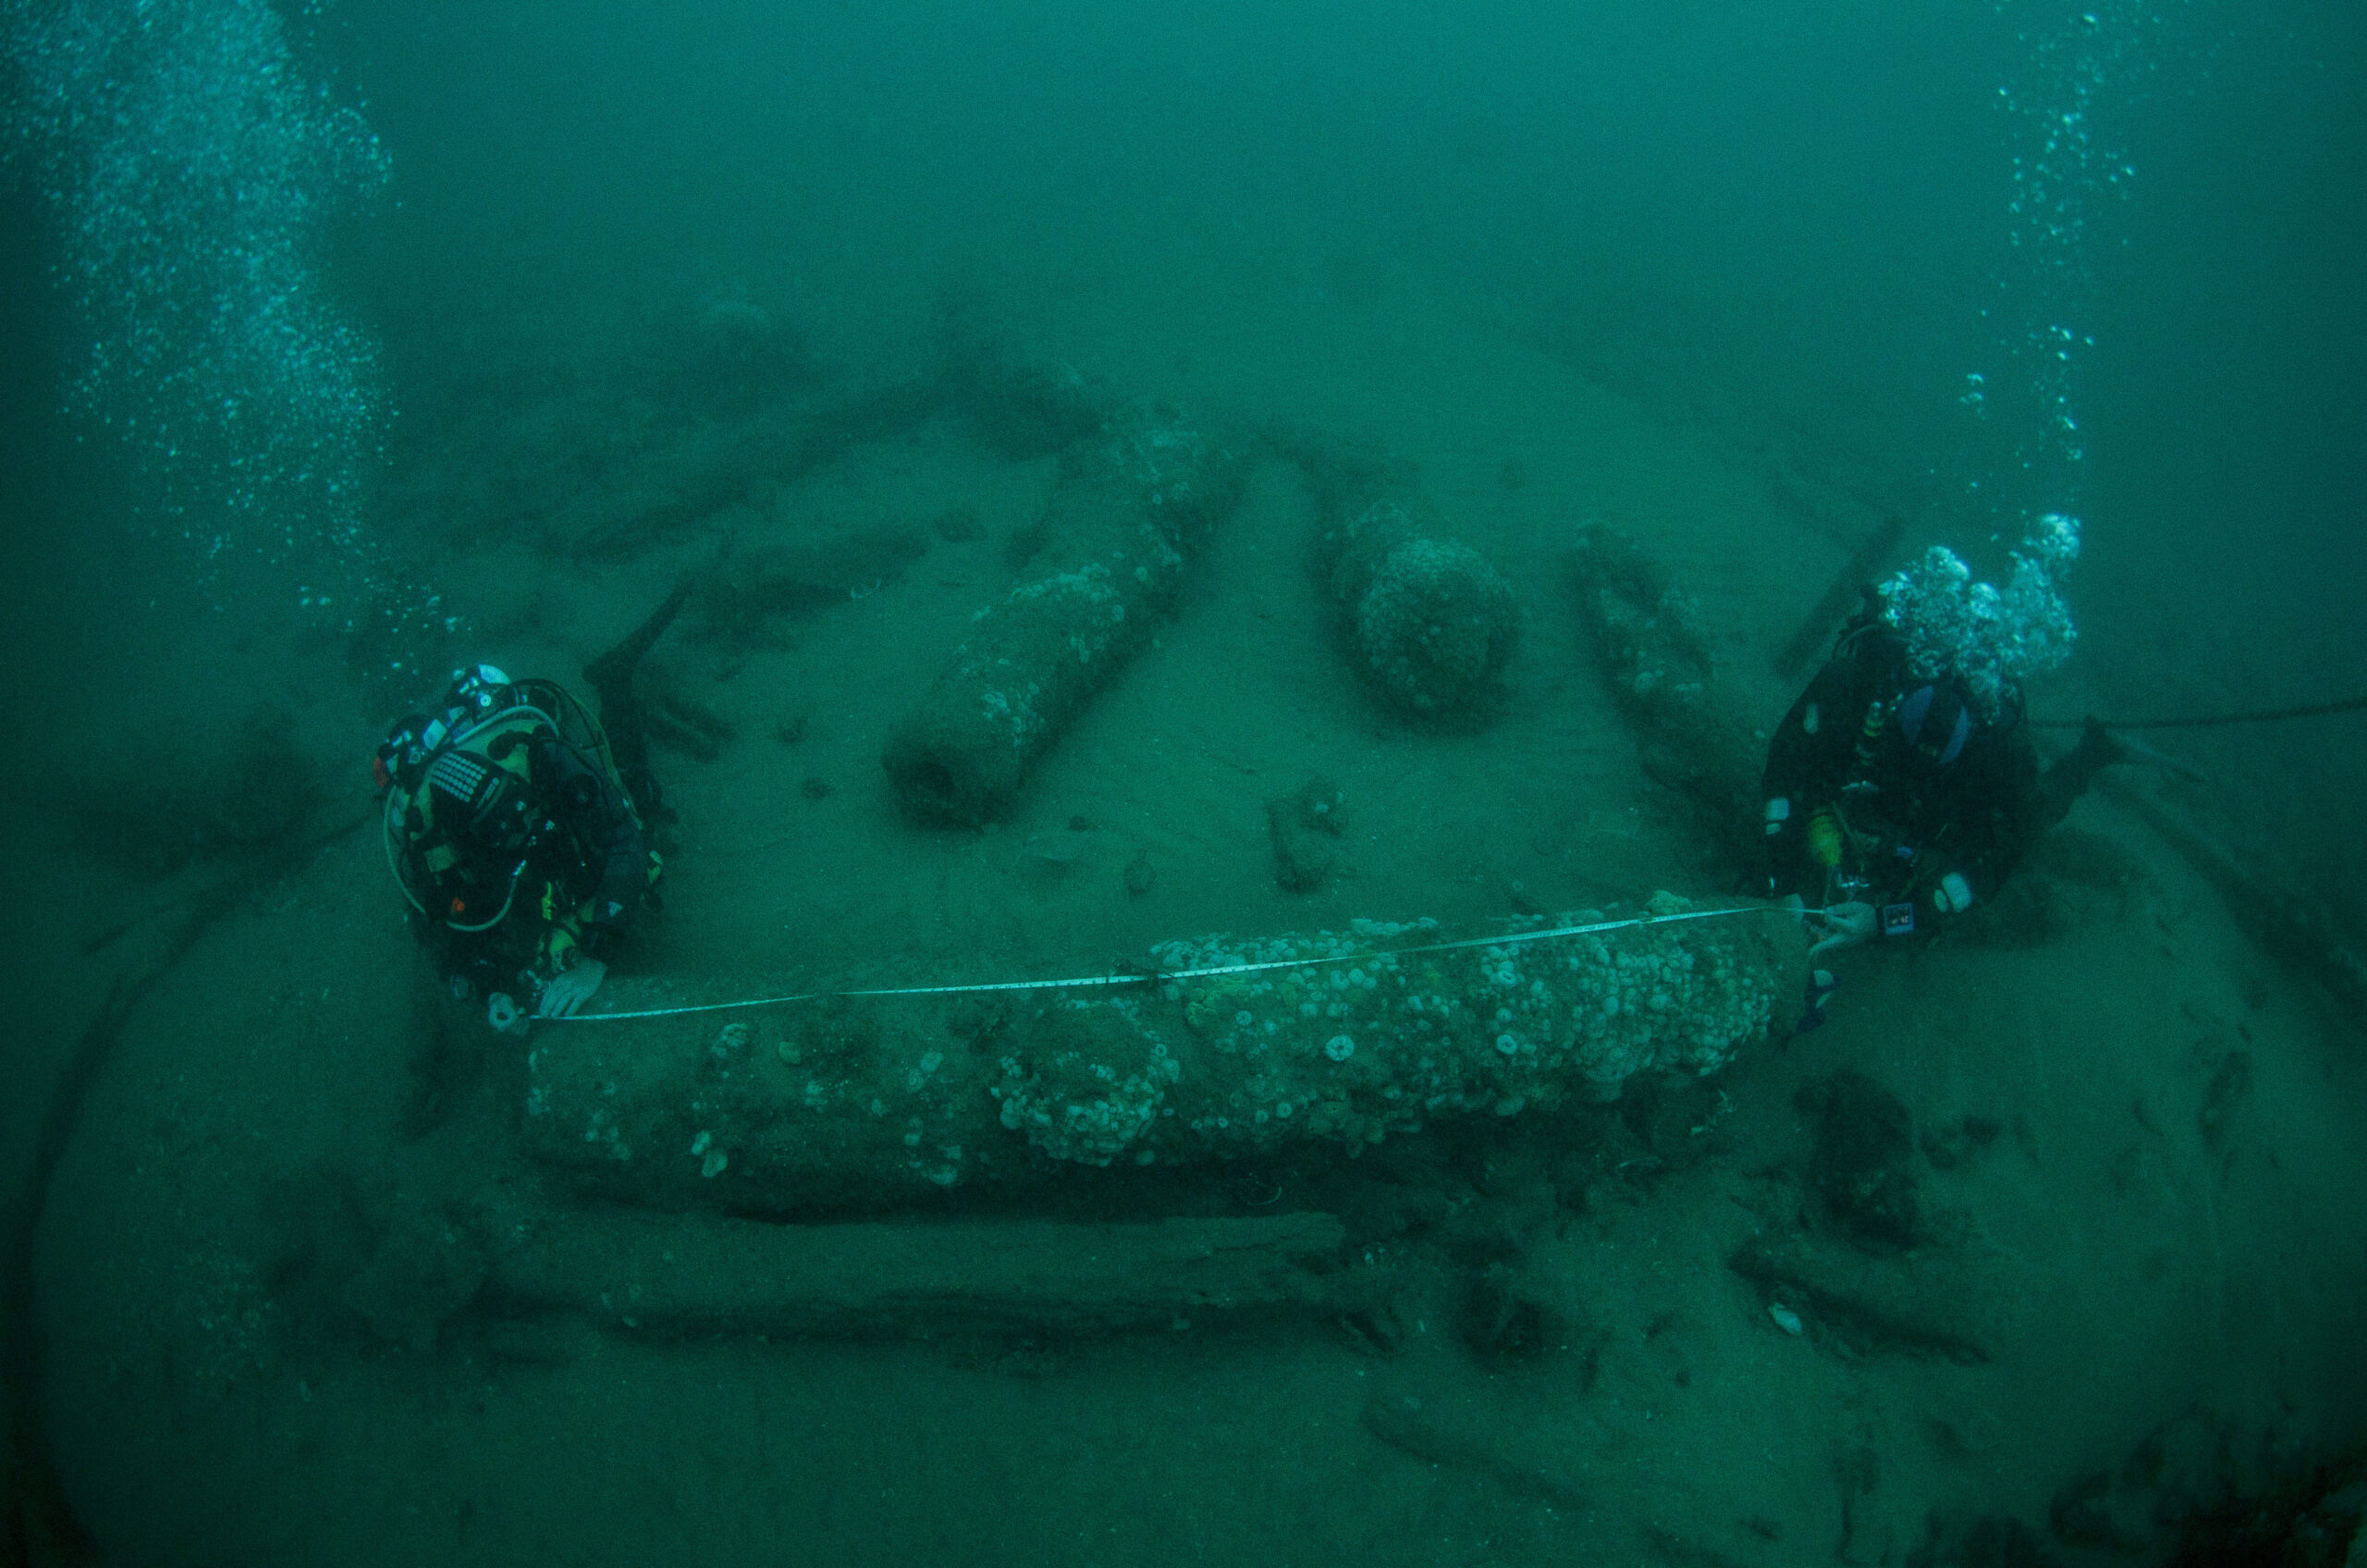 In this undated photo provided by Norfolk Historic Shipwrecks, Julian And Lincoln Barnwell measure the cannon found on the HMS Gloucester in 2007. Excavators and historians are telling the world about the wreck of a royal warship that sank in 1682 while carrying the future king James Stuart. The HMS Gloucester ran aground while navigating sandbanks off the town of Great Yarmouth on the eastern English coast. The wreck of the Gloucester was found in 2007 by brothers Julian and Lincoln Barnwell and others after a four-year search. (Norfolk Historic Shipwrecks via AP)